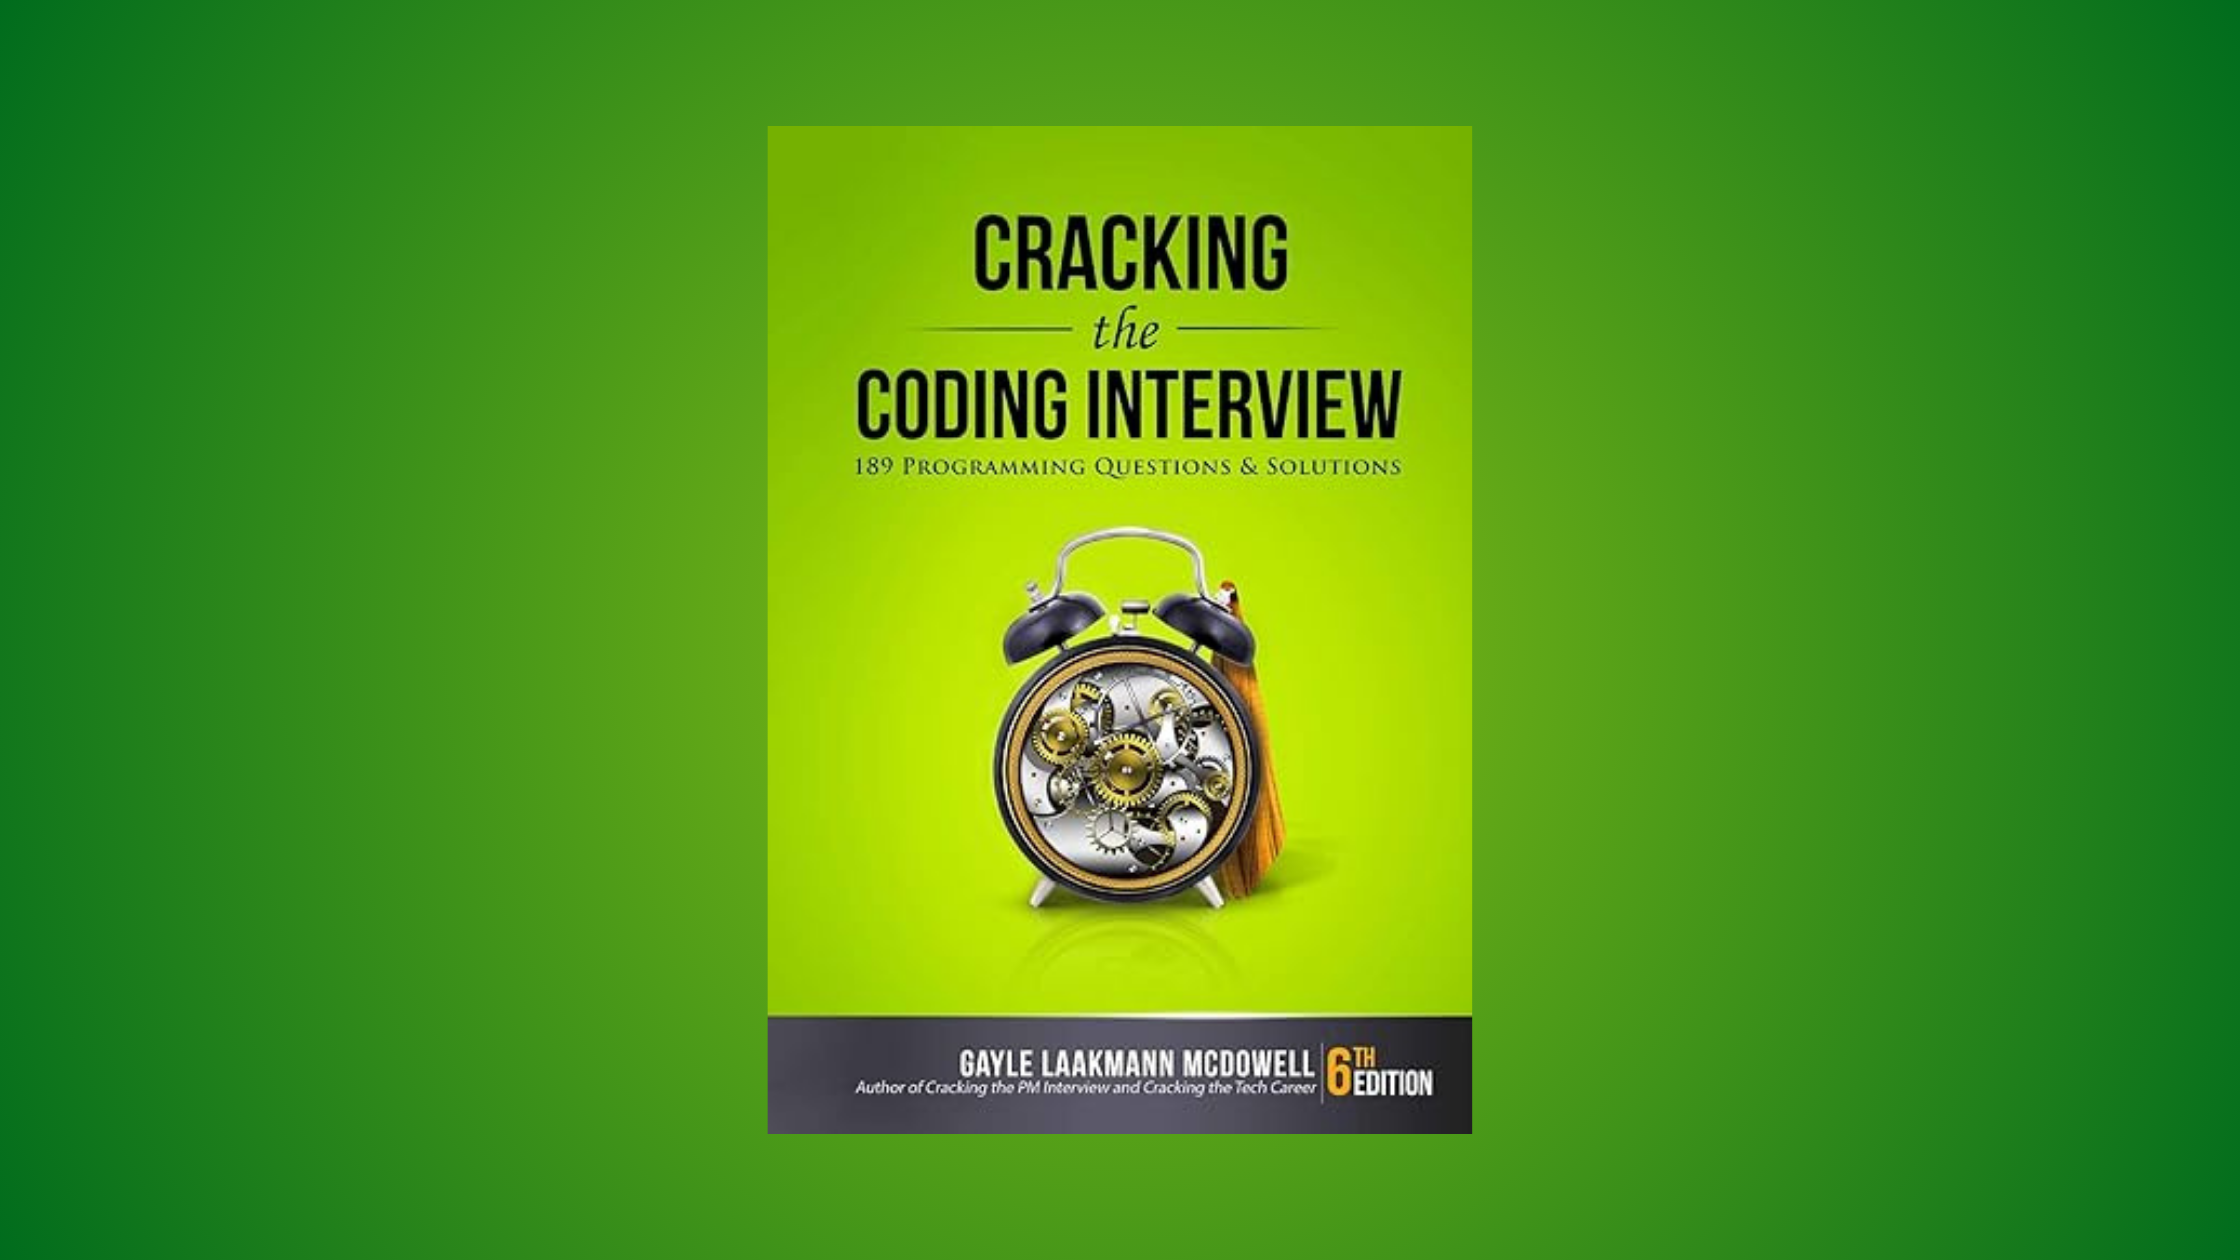 Cover photo of Cracking the Coding Interview: 189 Programming Questions and Solutions 6th Edition